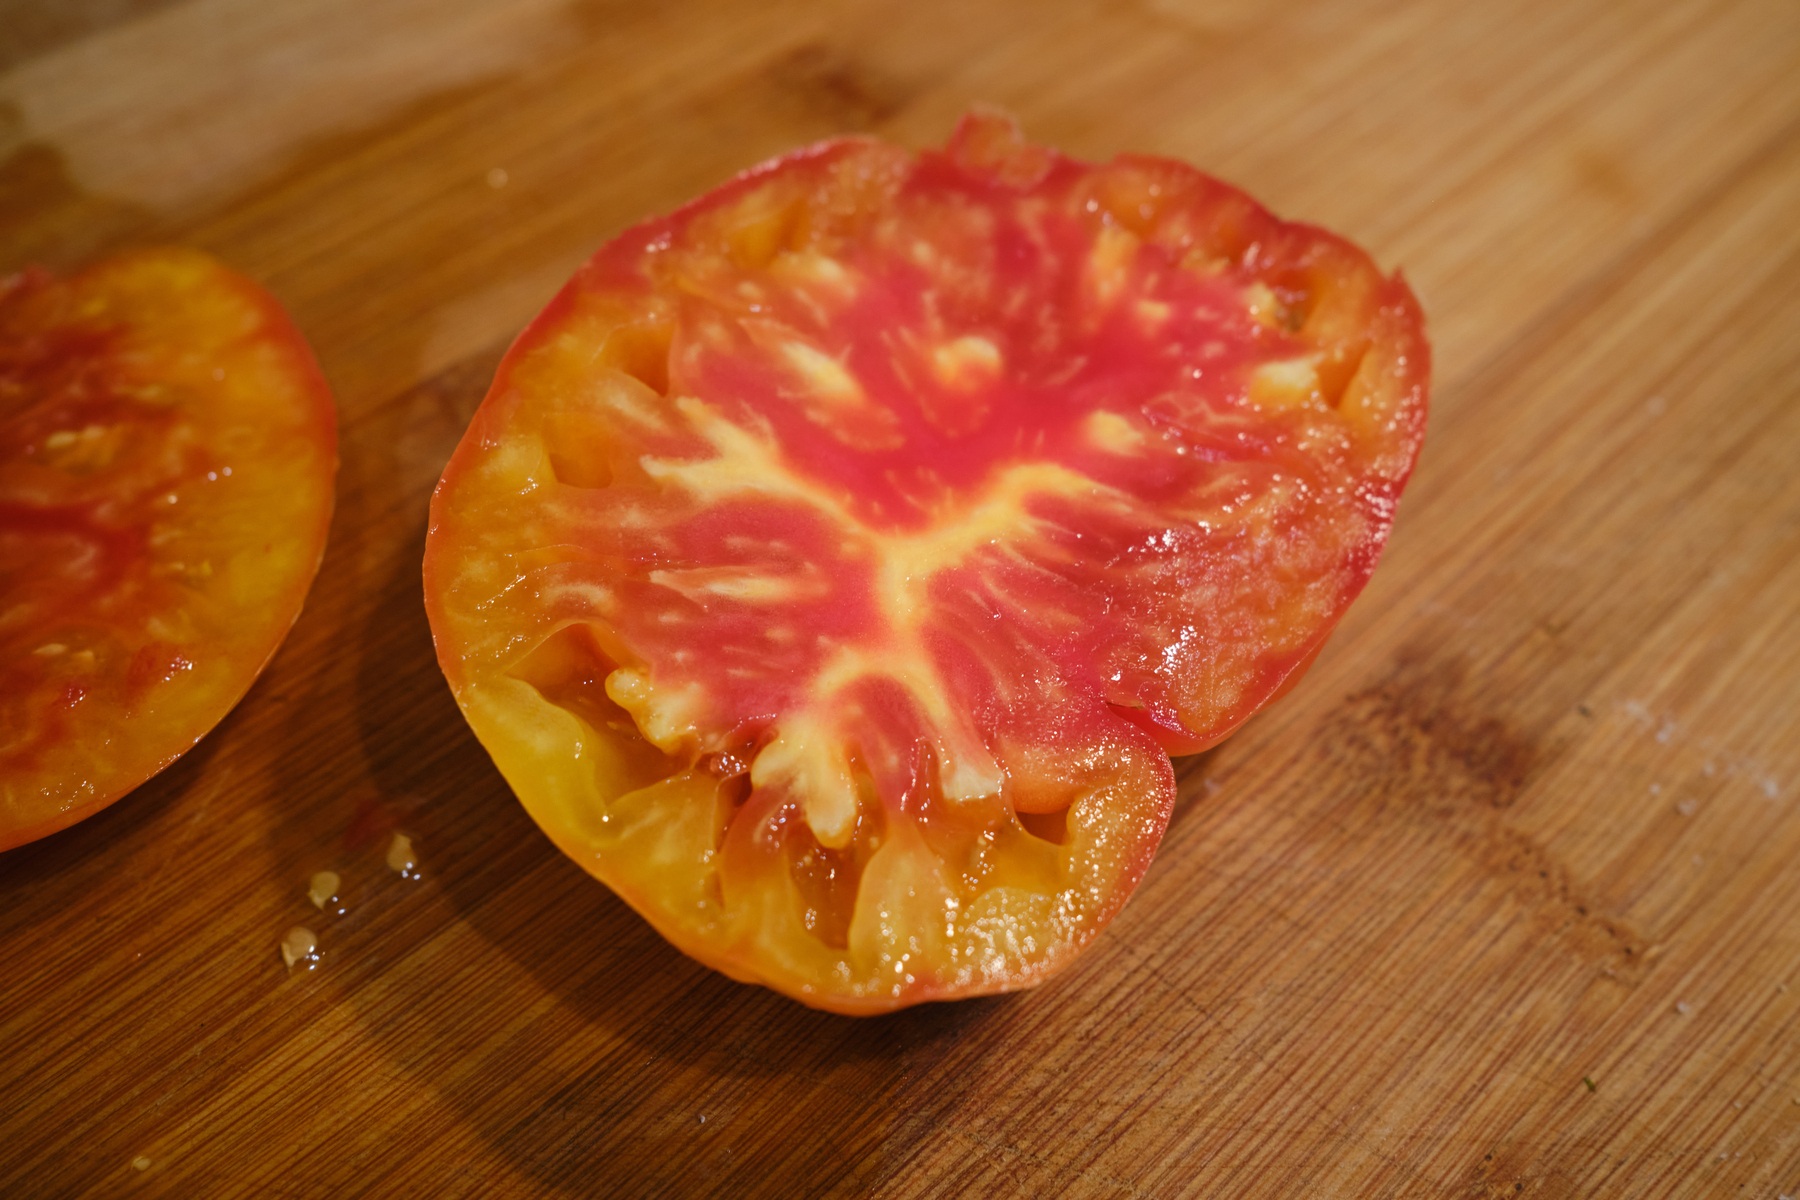 A half of a heirloom tomato, showing streaks of reds and yellows. 